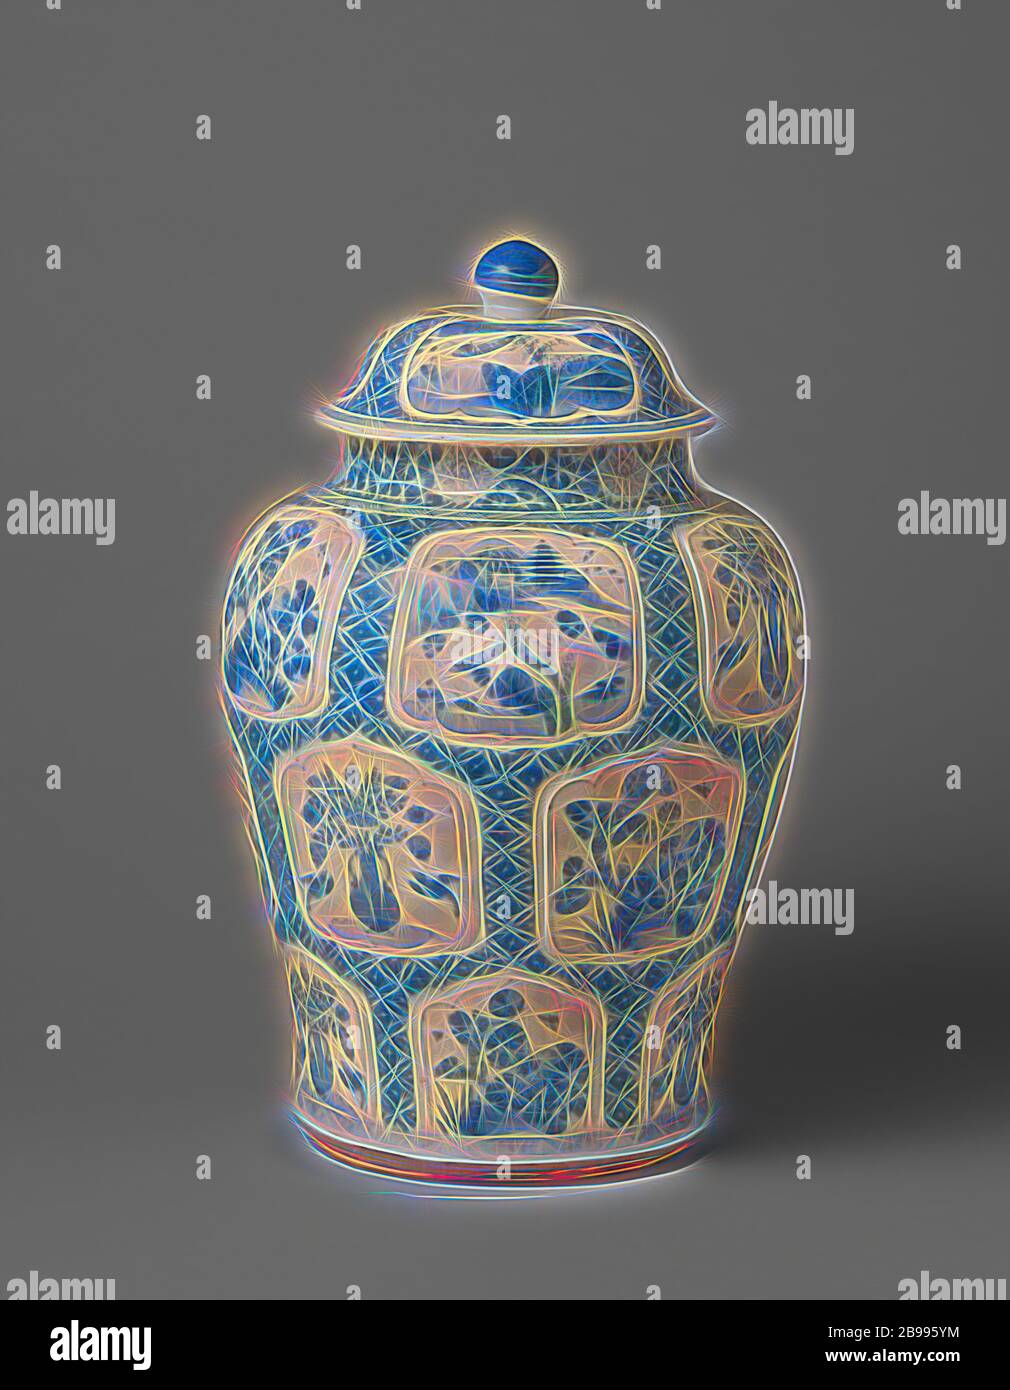 Baluster covered jar with flower vases, flowering plants and landscapes in panels, Baluster-shaped porcelain covered pot, painted in underglaze blue. The belly is covered with napkin work containing saved, modeled, scalloped cartouches with a flower vase (lotus) with two birds, flowering plants (peony) near a rock or a river cap with two people, a boat, pavilions, trees and mountains. The neck with stylized lotus tendrils. On the shoulder and around the foot a band with hatching. Blue and white., anonymous, China, c. 1680 - c. 1720, Kangxi-period (1662-1722), porcelain (material), glaze, cobal Stock Photo